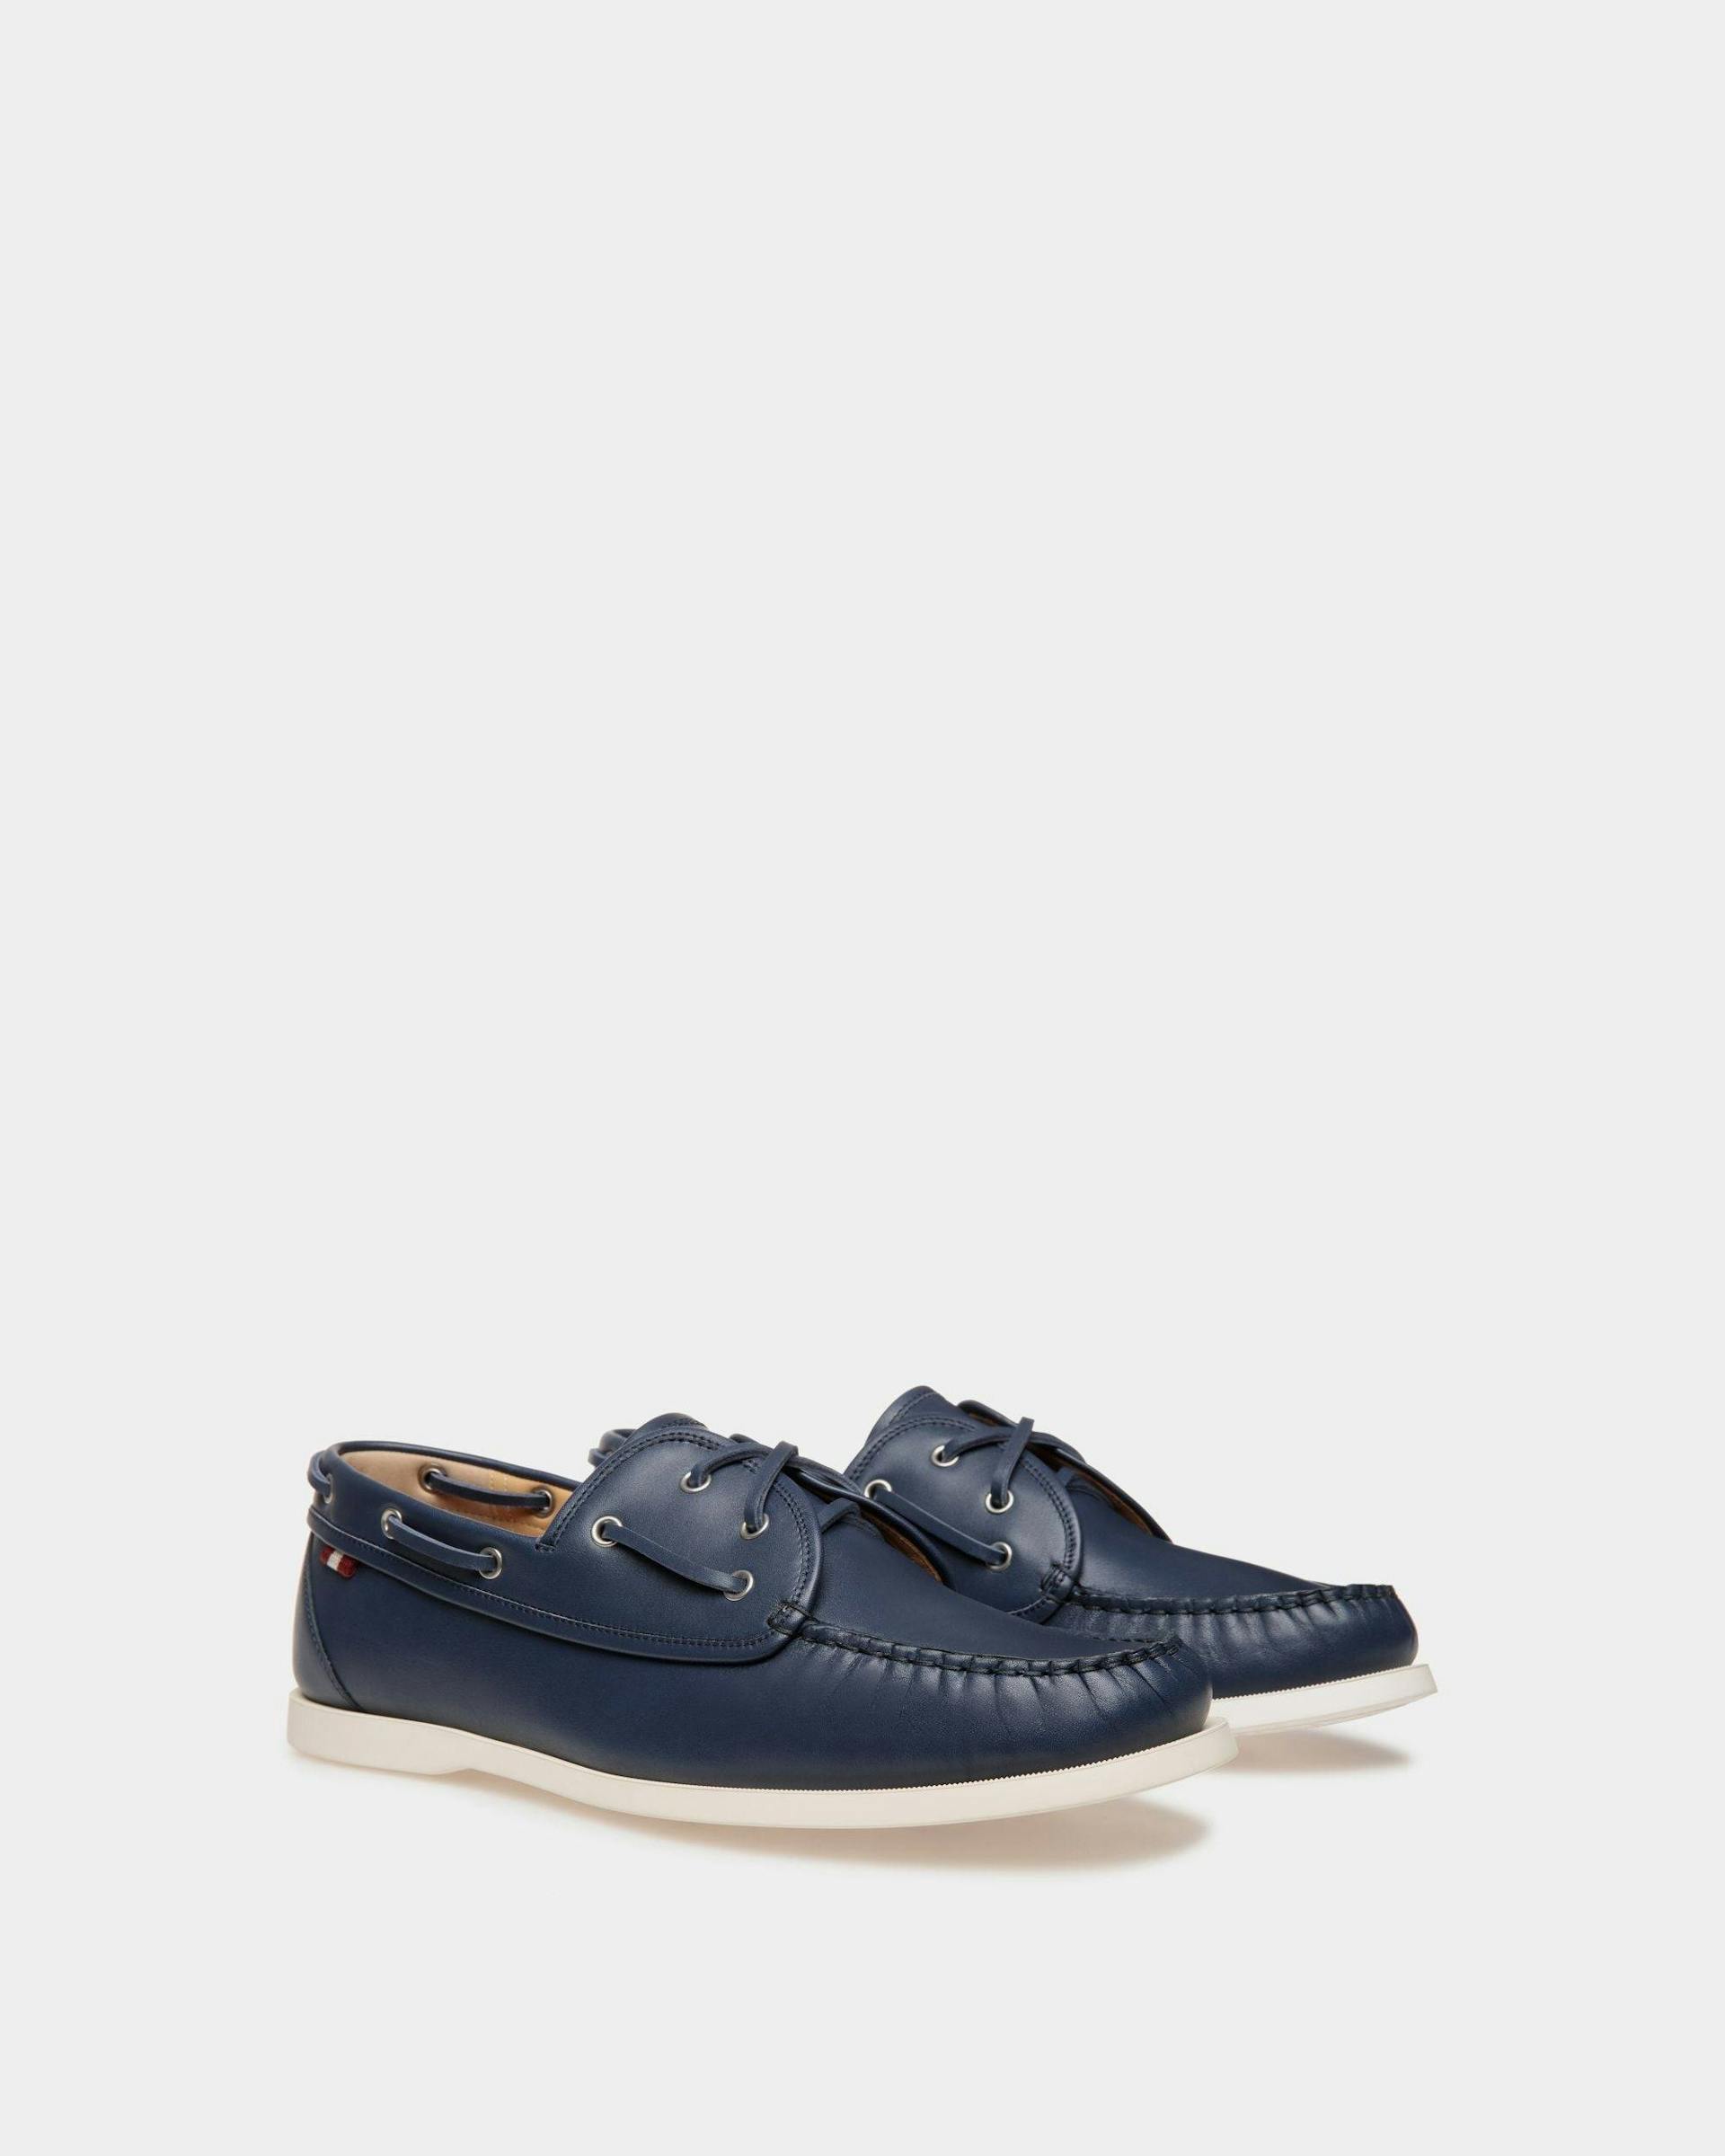 Men's Nelson Loafer in Leather | Bally | Still Life 3/4 Front